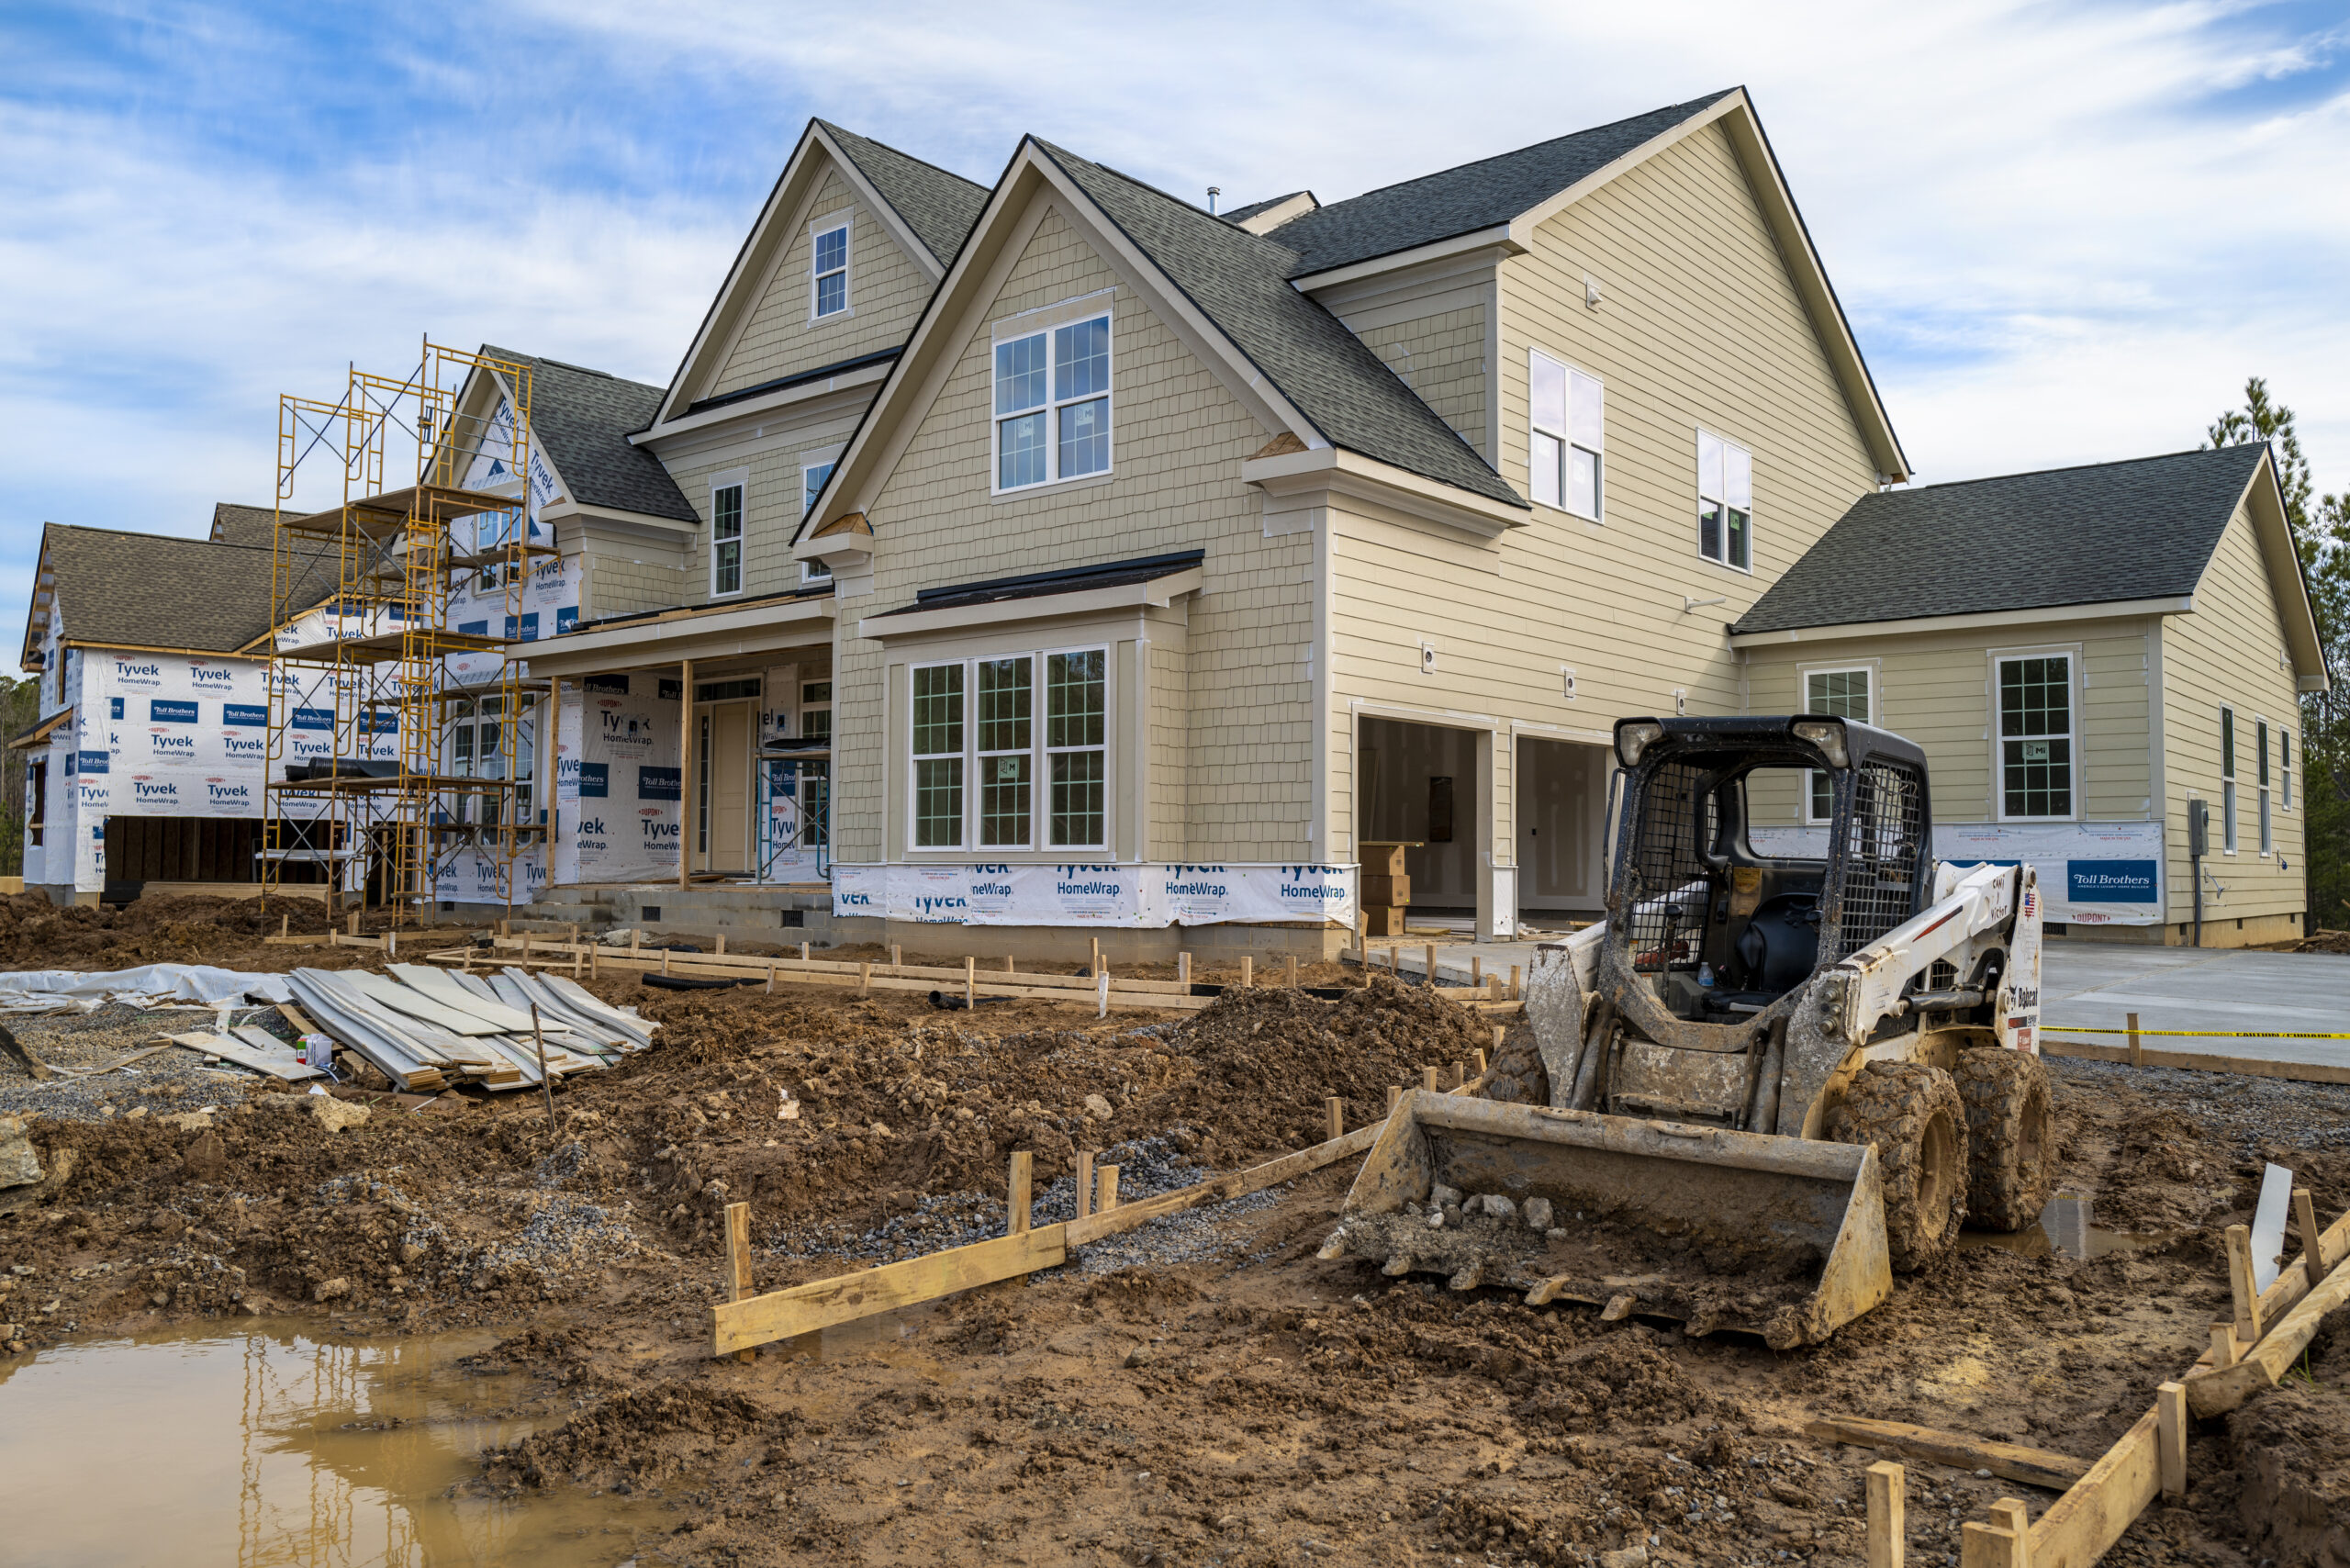 Home Builder Boom: Pros and Cons of the 2021 Housing Market